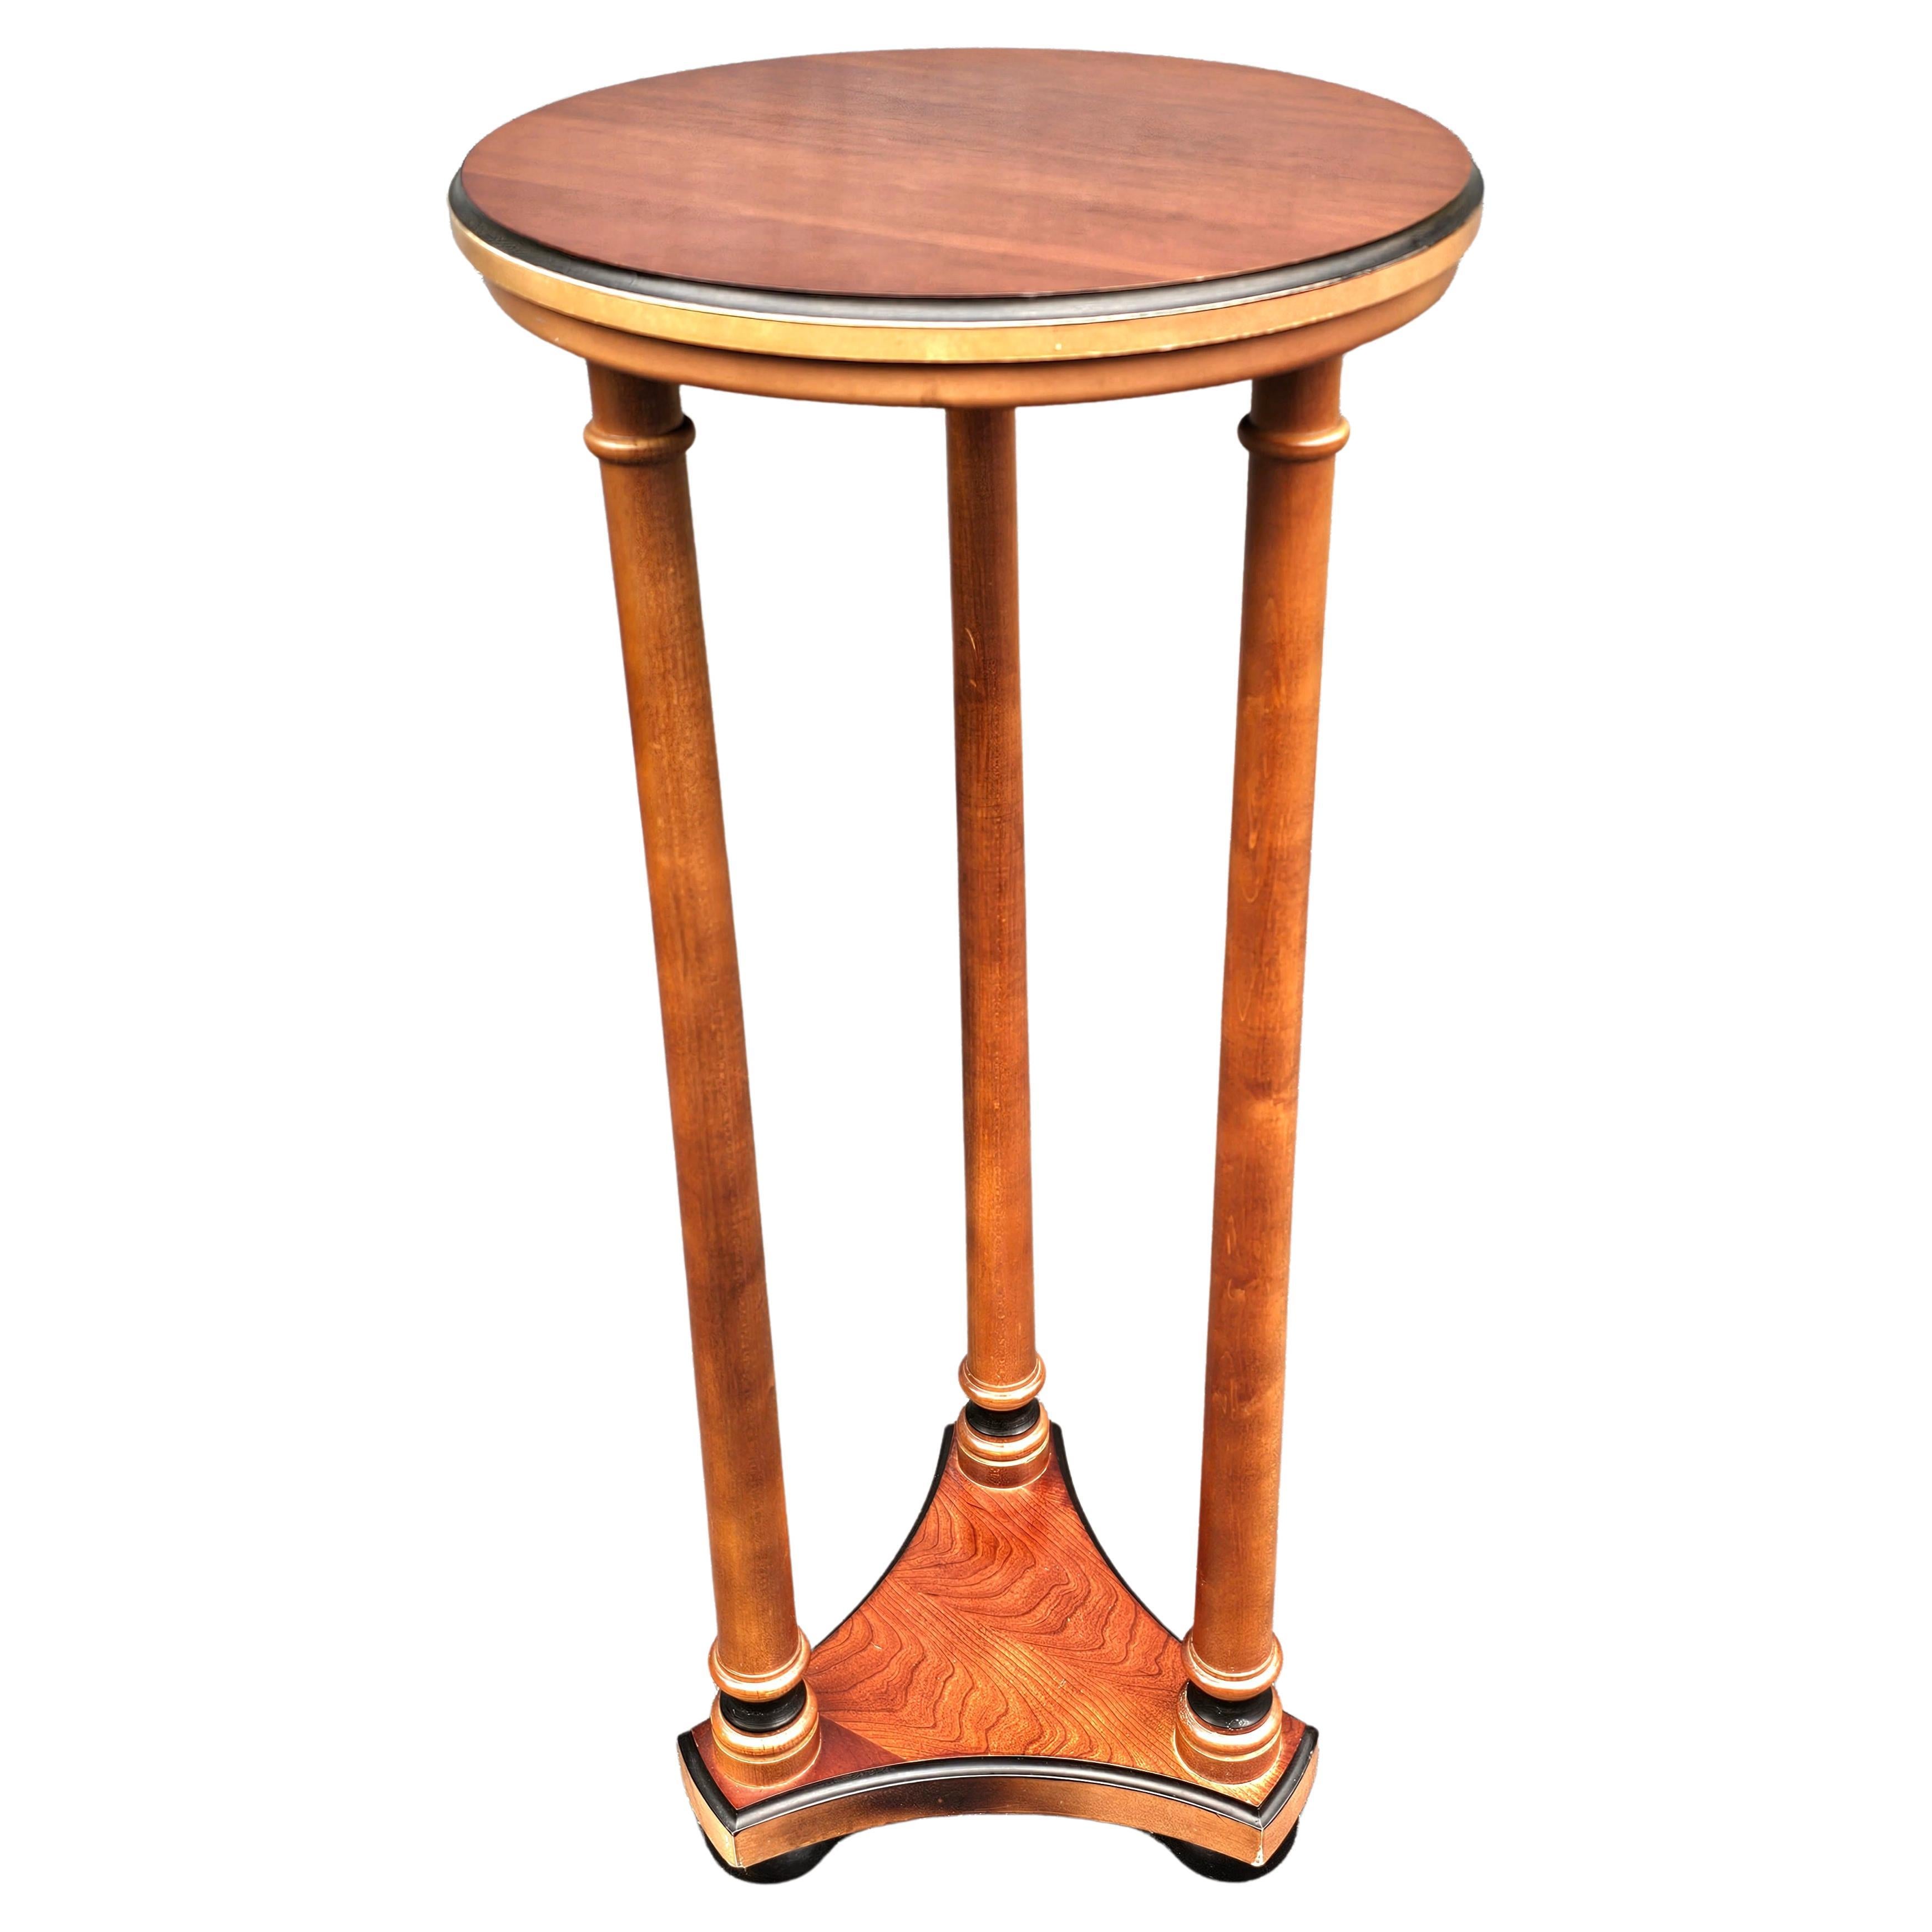 Late 20th Century Empire Style Fruitwood Pedestal Side Table In Good Condition For Sale In Germantown, MD